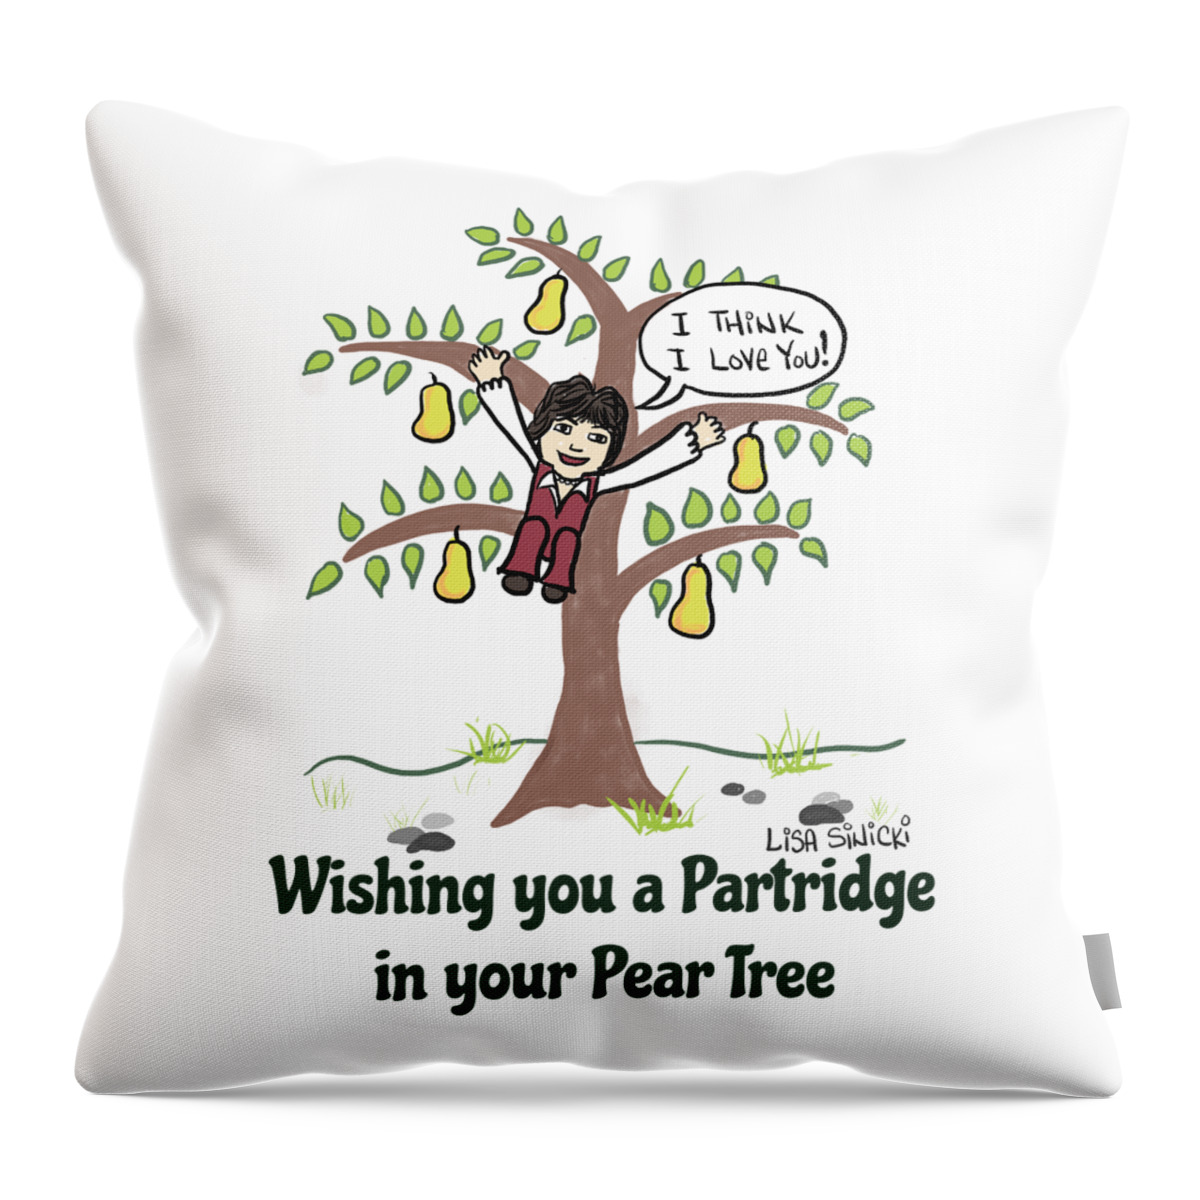 The Partridge Family Throw Pillow featuring the digital art Partridge in your Pear Tree by Lisa Sinicki